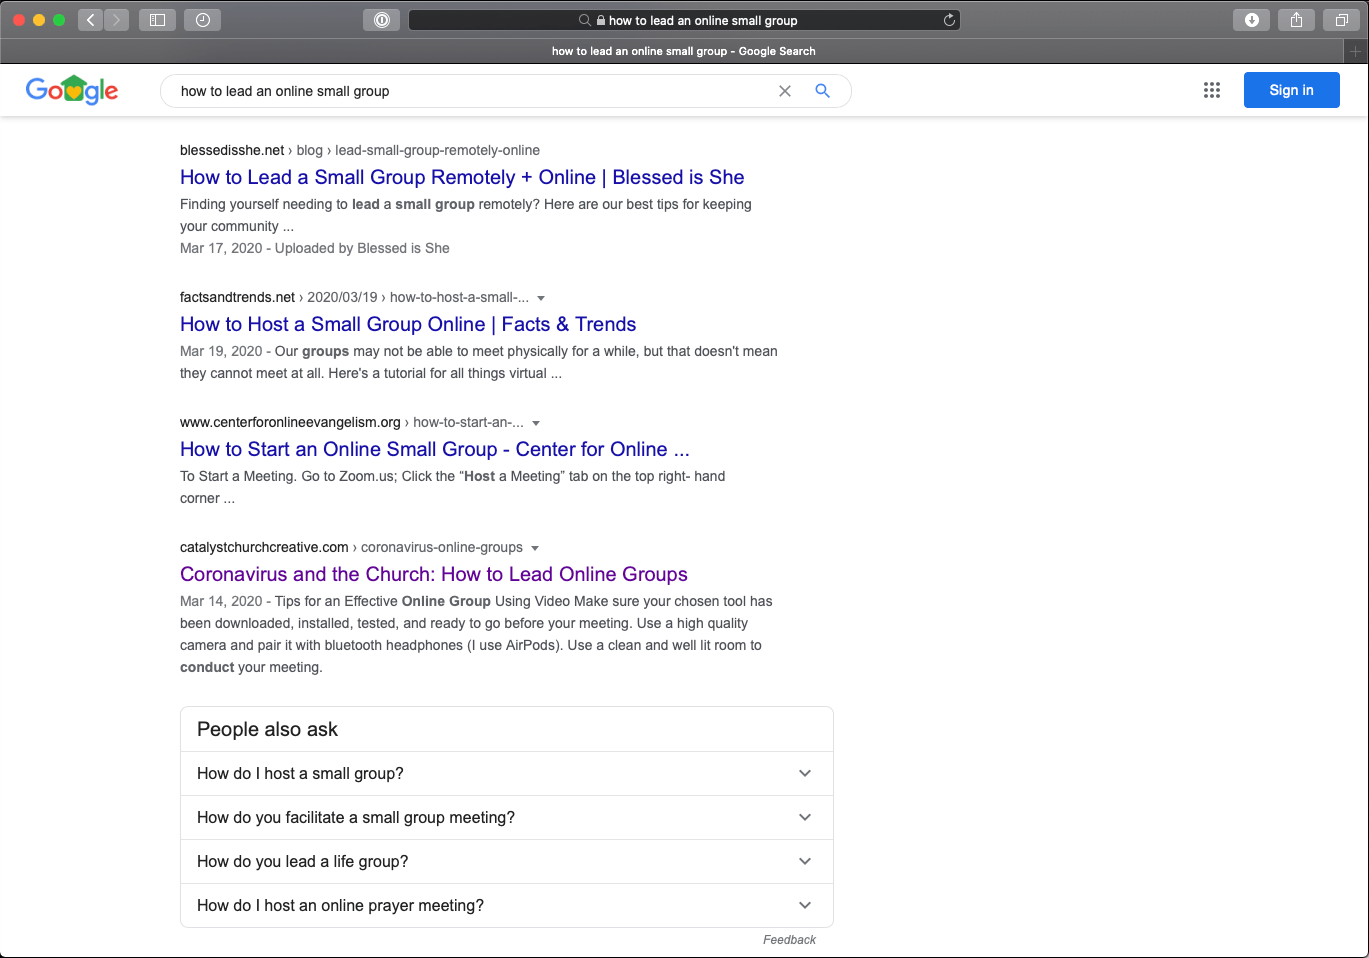 Google search results of the query "how to lead an online small group".